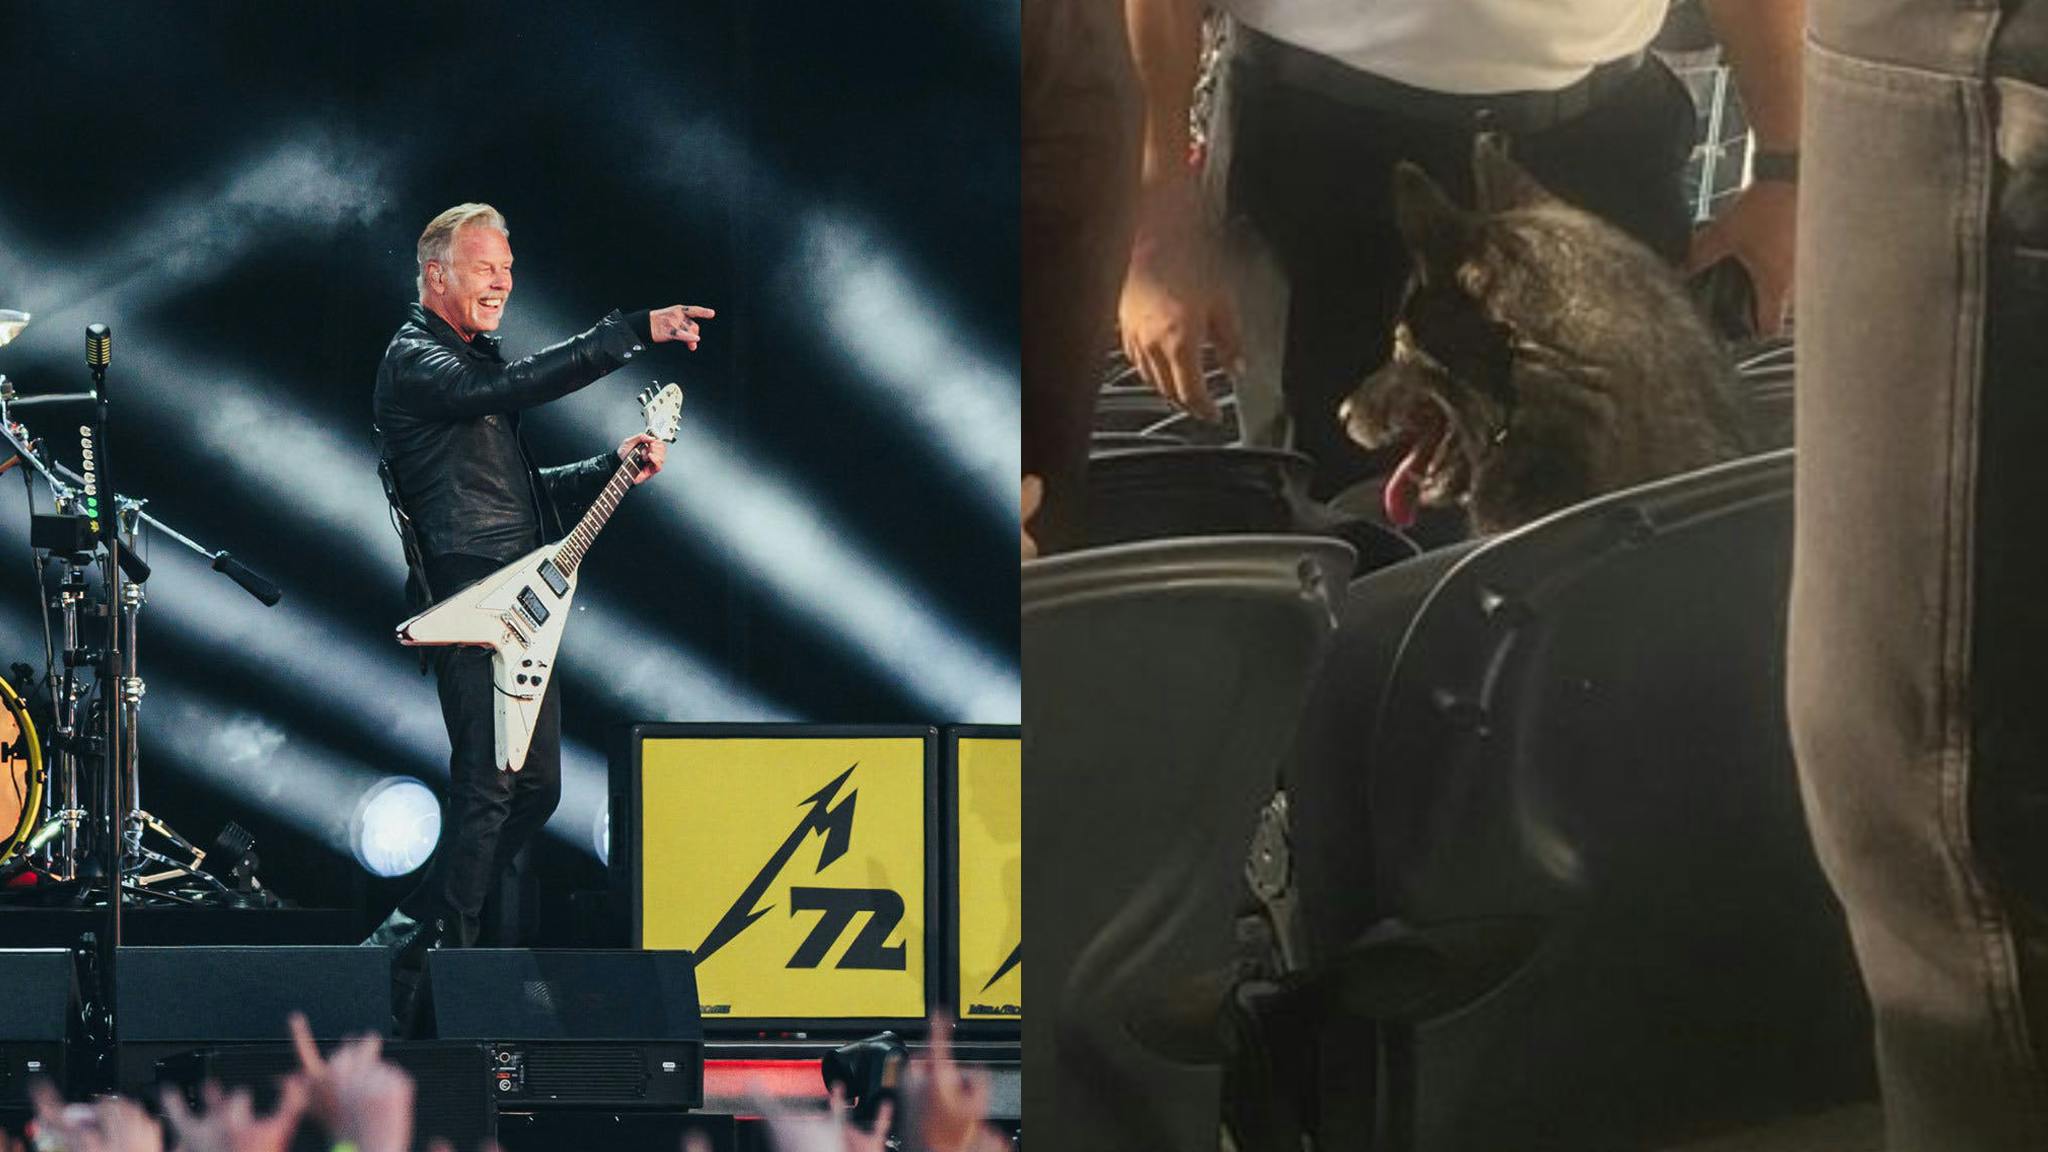 This dog somehow ended up watching Metallica after sneaking out of her home